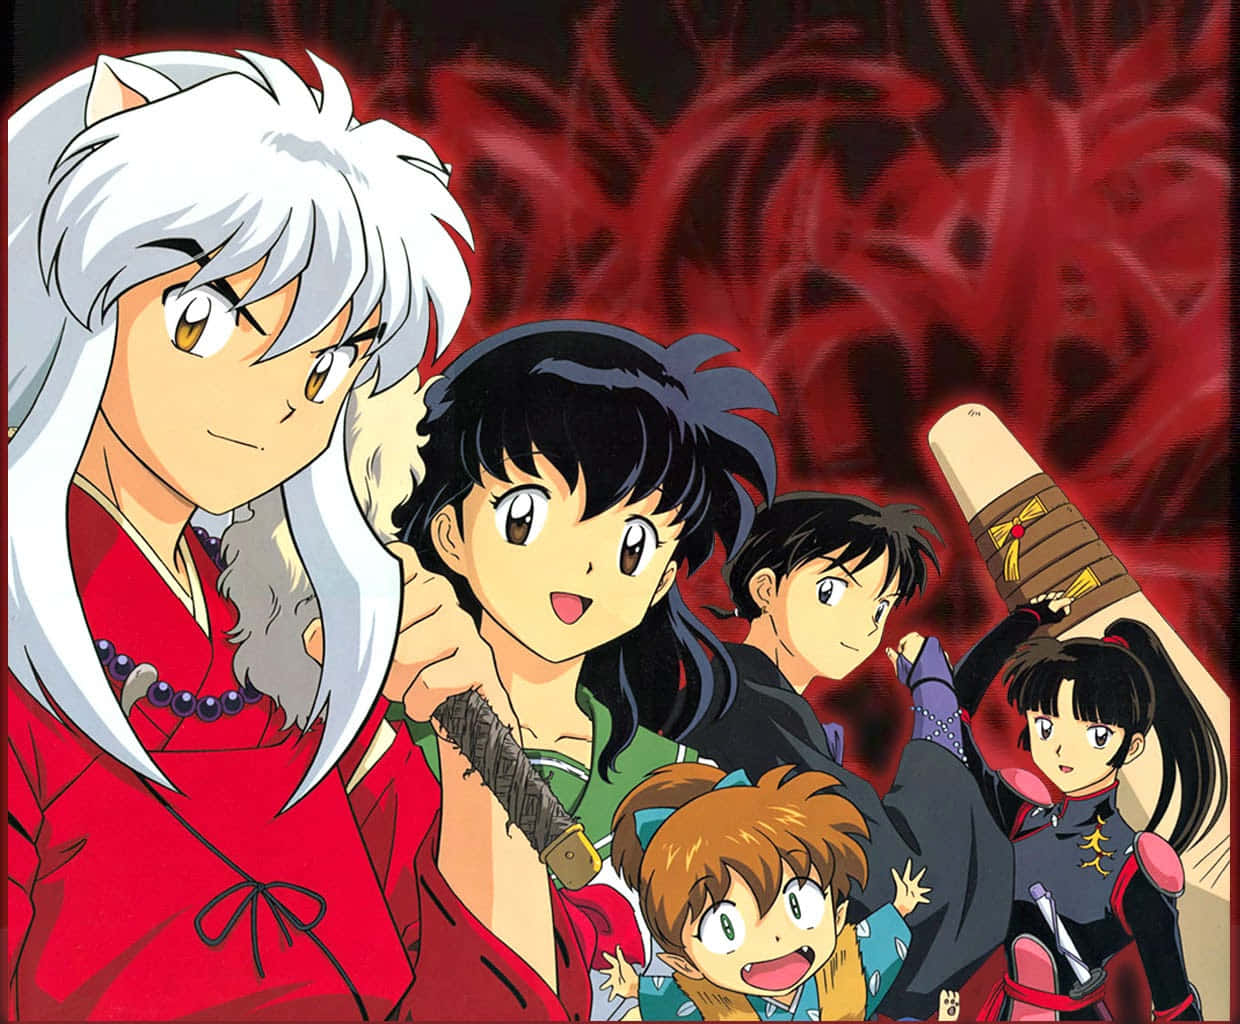 Inuyasha and the gang exploring the mystical world together Wallpaper